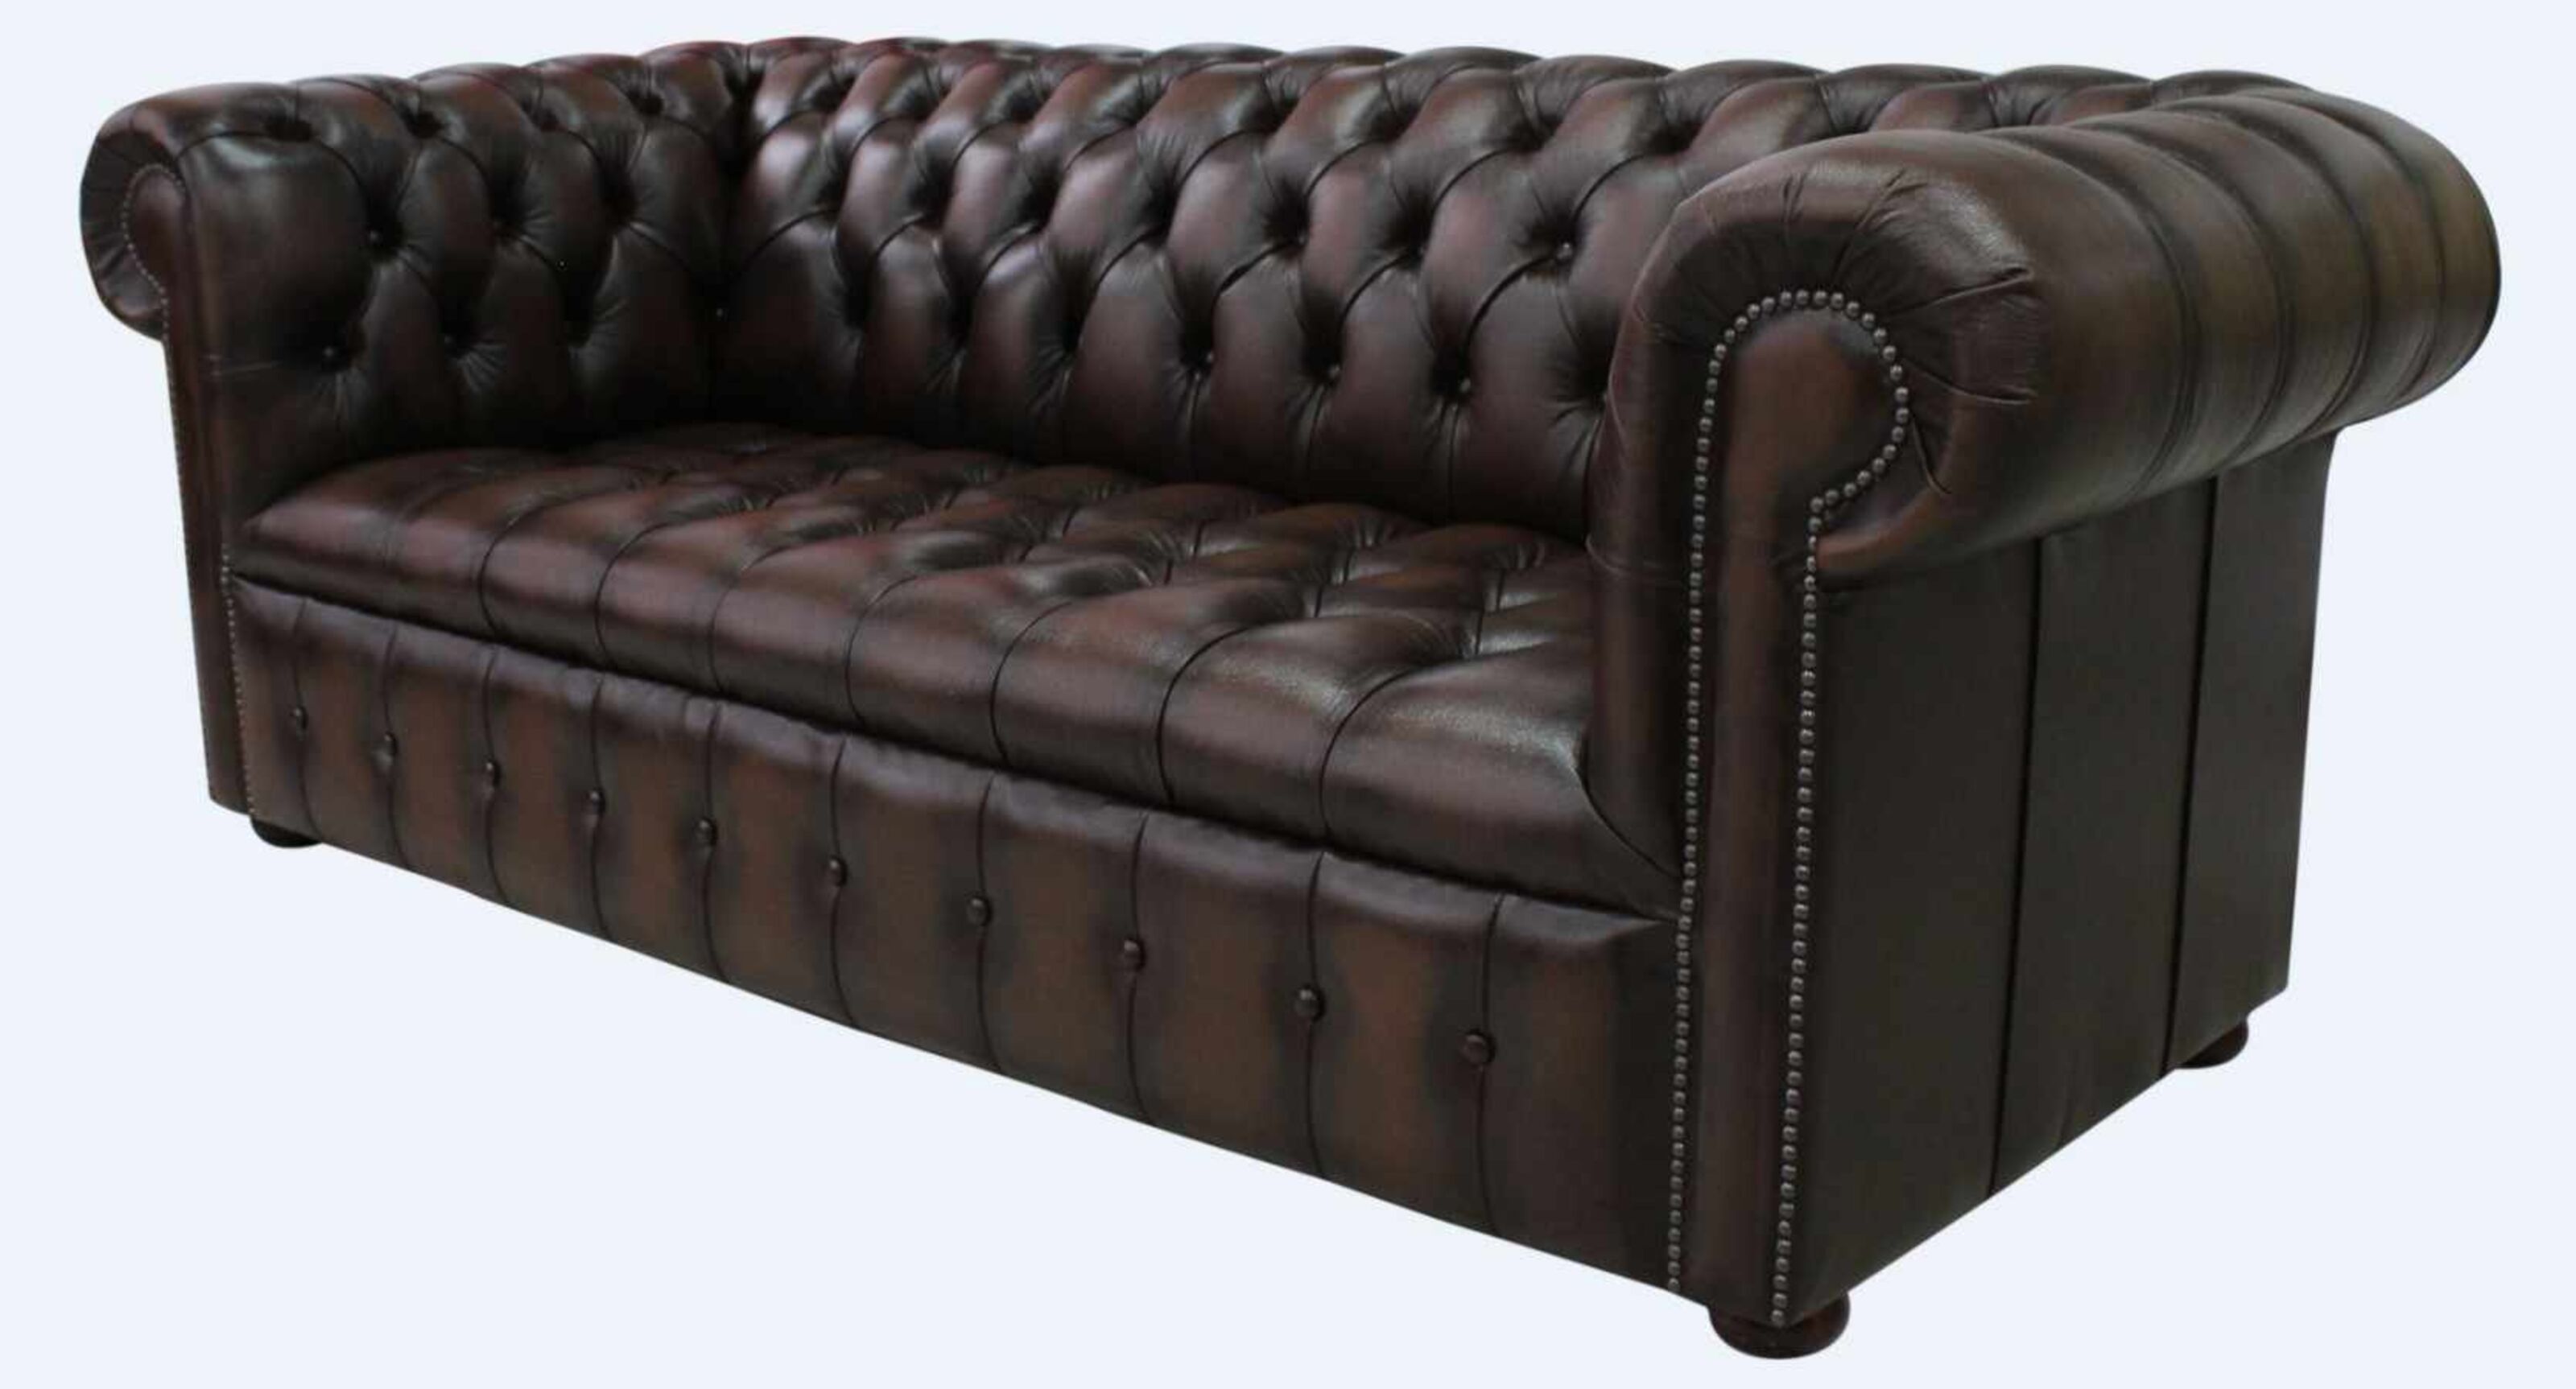 CK Chesterfield Genuine Leather 3 Seater Sofa and Club Chairs Set Antique Brown 